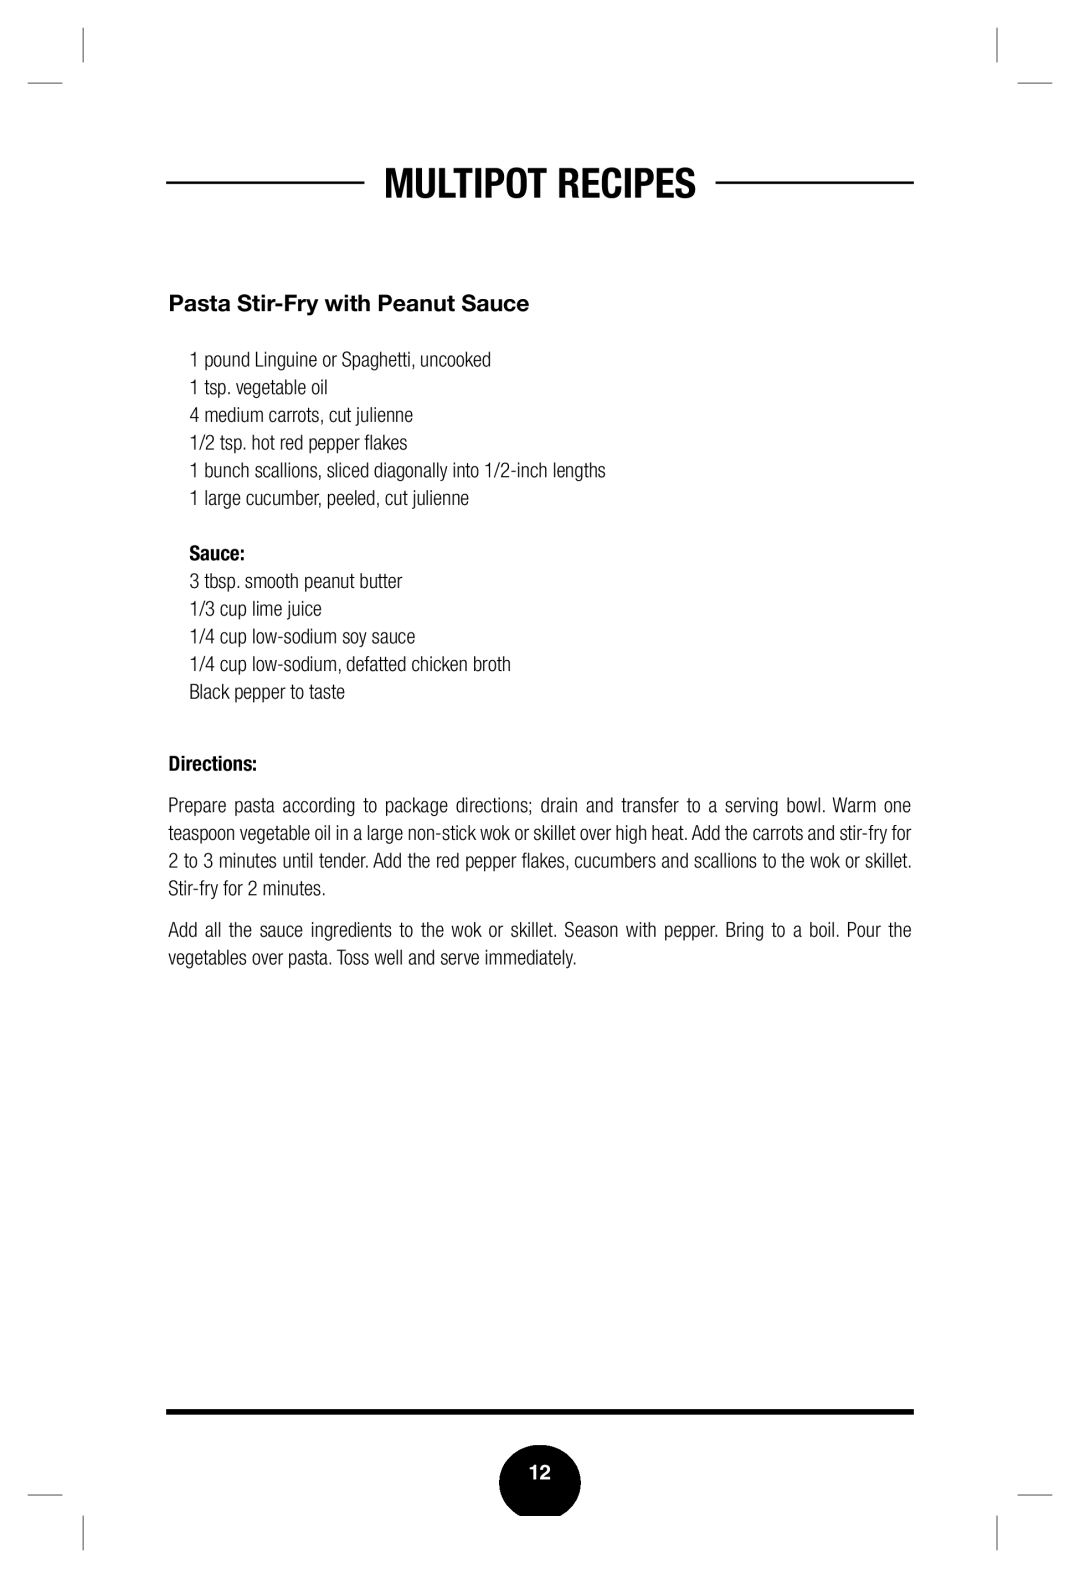 Fagor America none manual Pasta Stir-Frywith Peanut Sauce, Multipot Recipes, Directions 